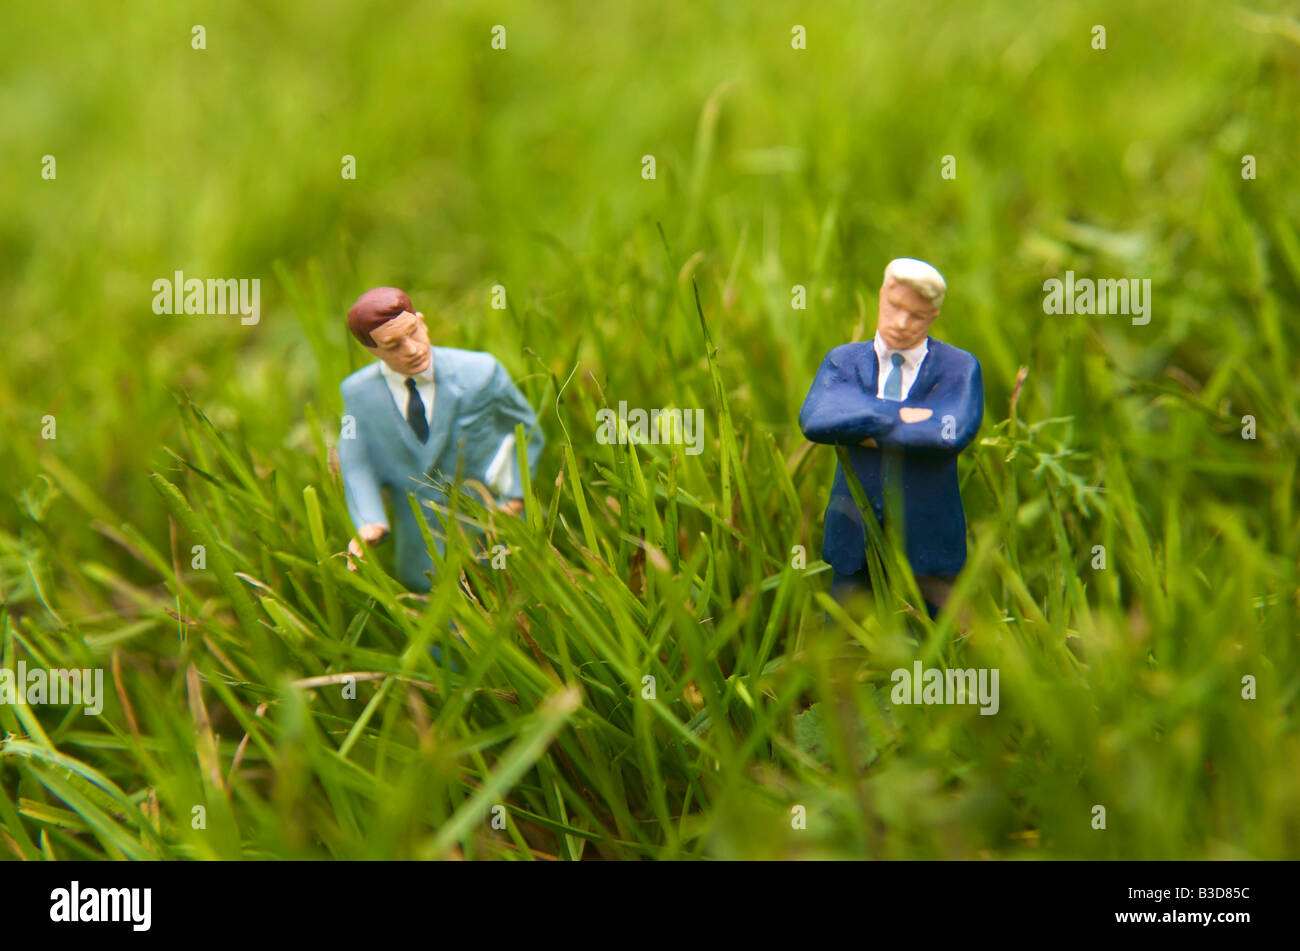 Businessmen standing in a field of grass - land purchase / sales / construction / planning consent / green belt concept Stock Photo